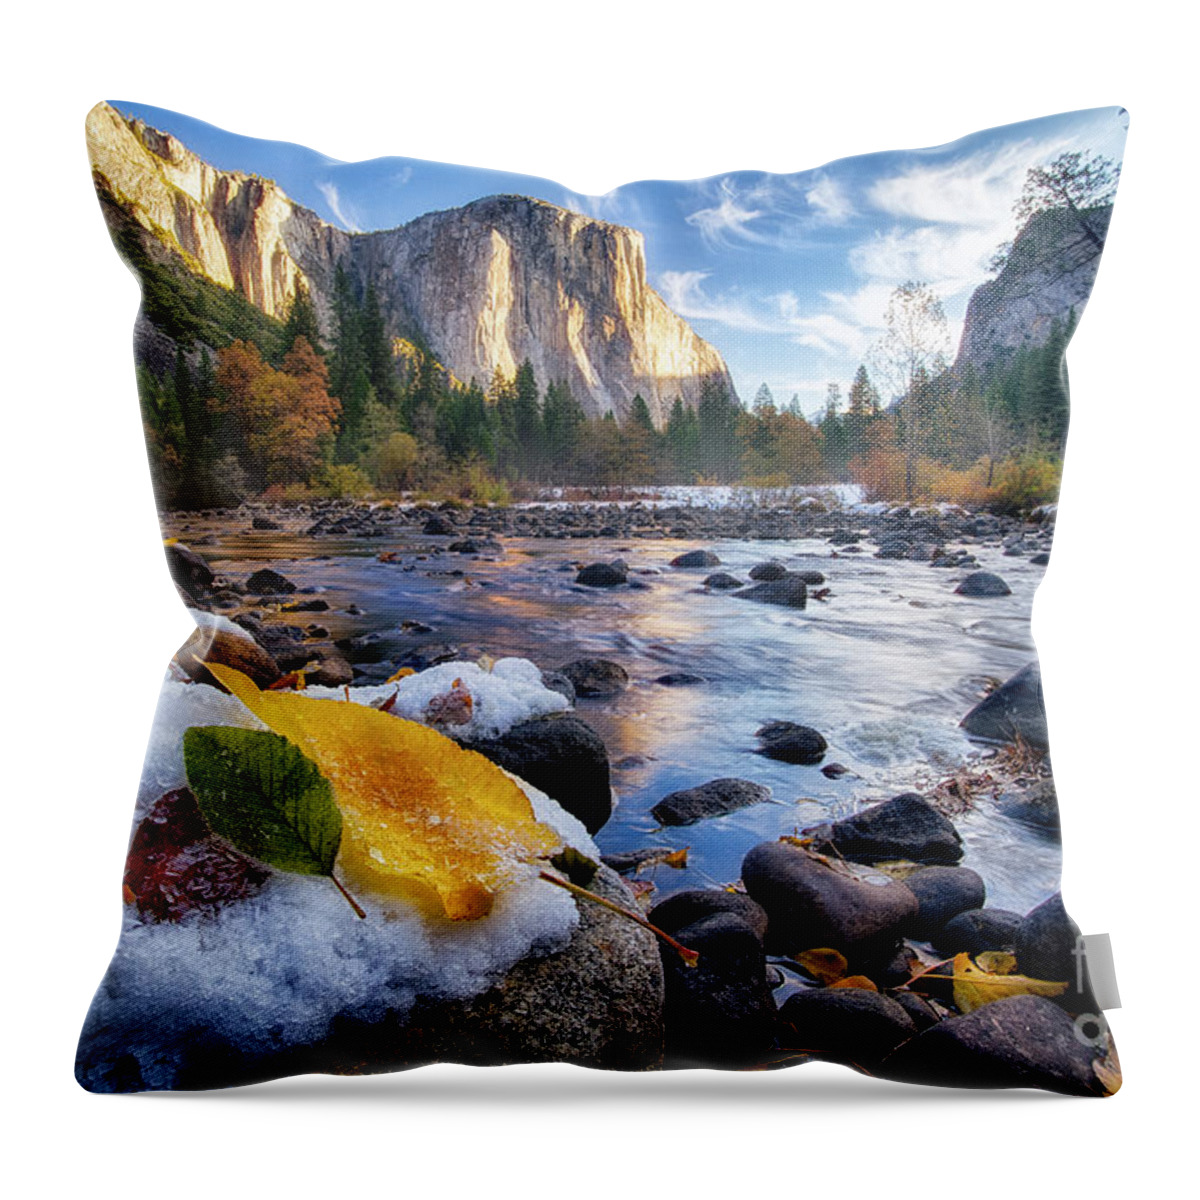 Yosemite Throw Pillow featuring the photograph Morning Mist by Anthony Michael Bonafede